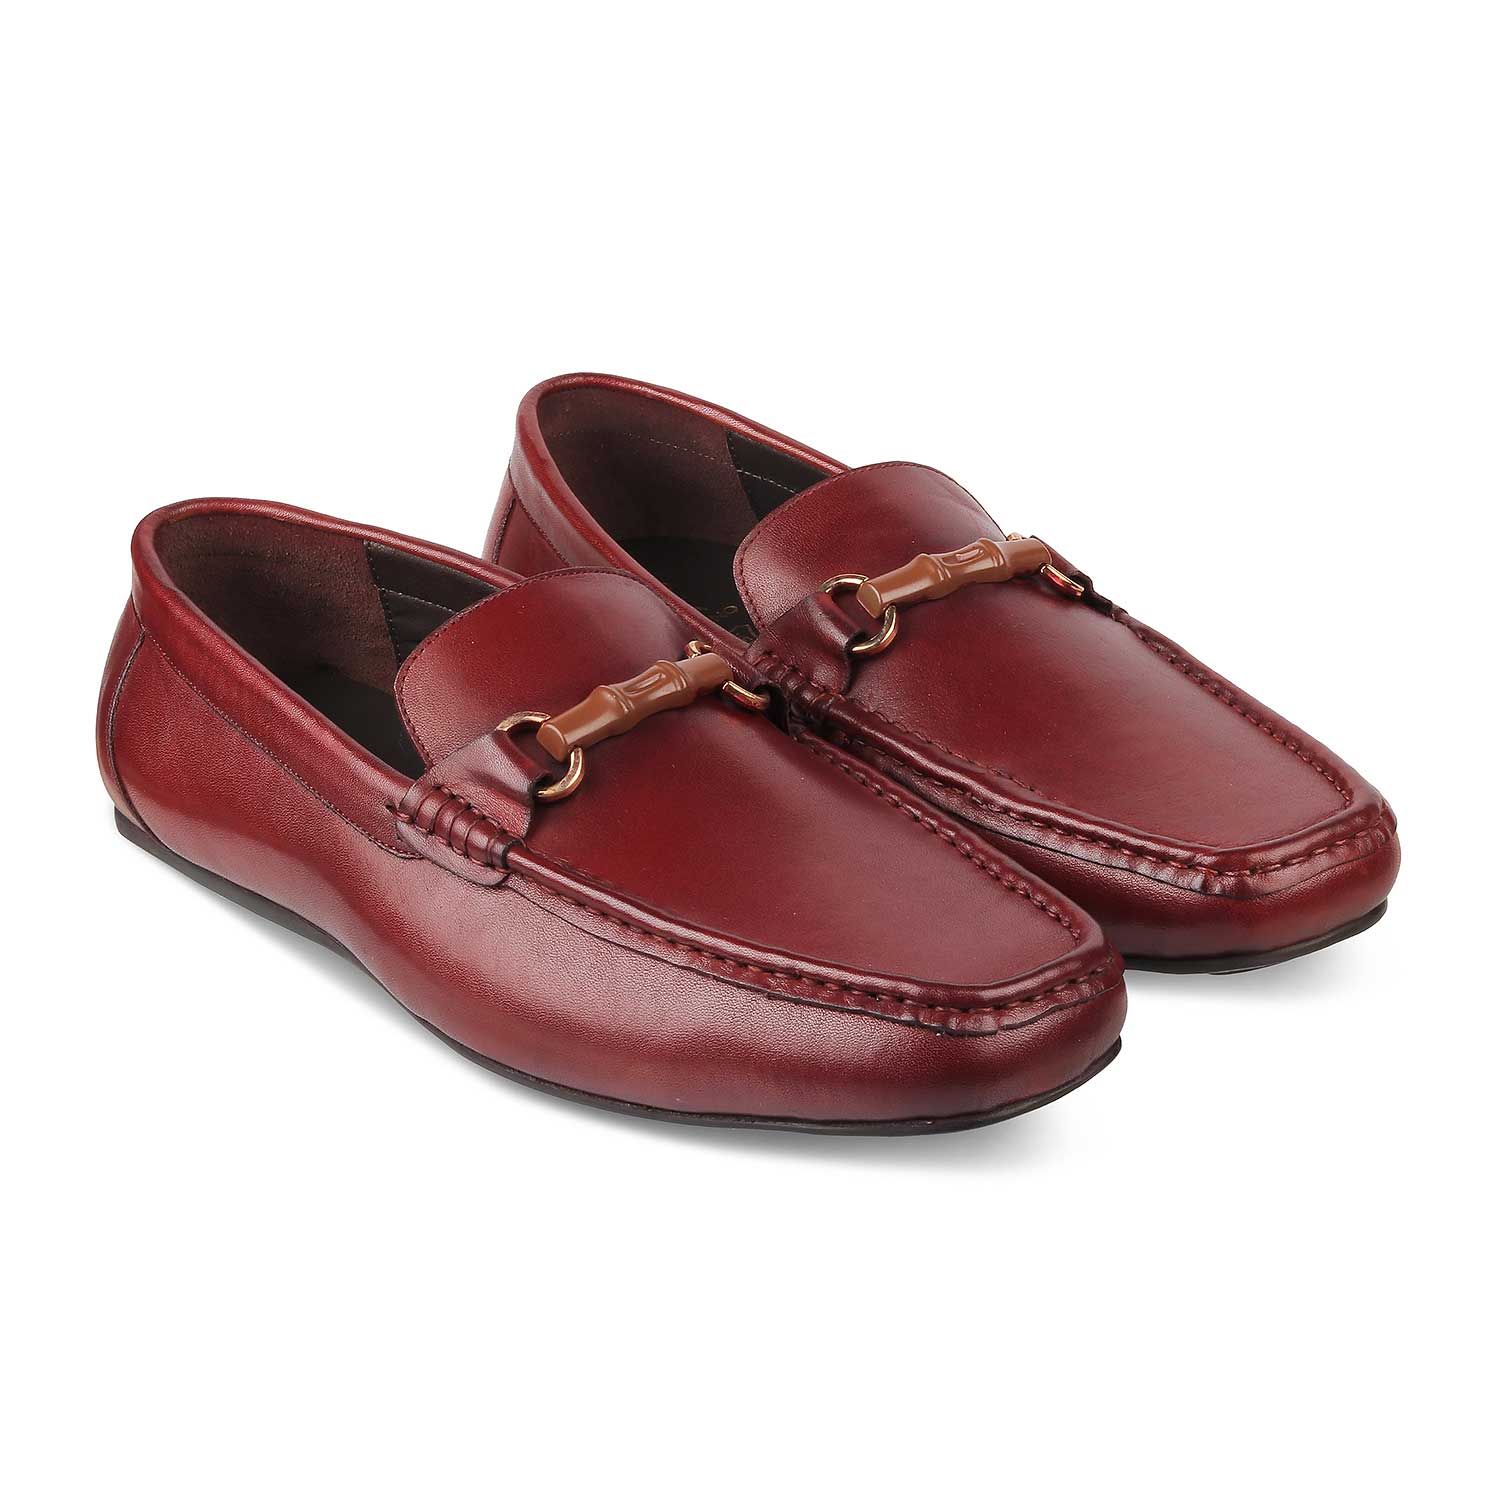 The Roshbuck Wine Leather Loafers for Men 43 I Wine